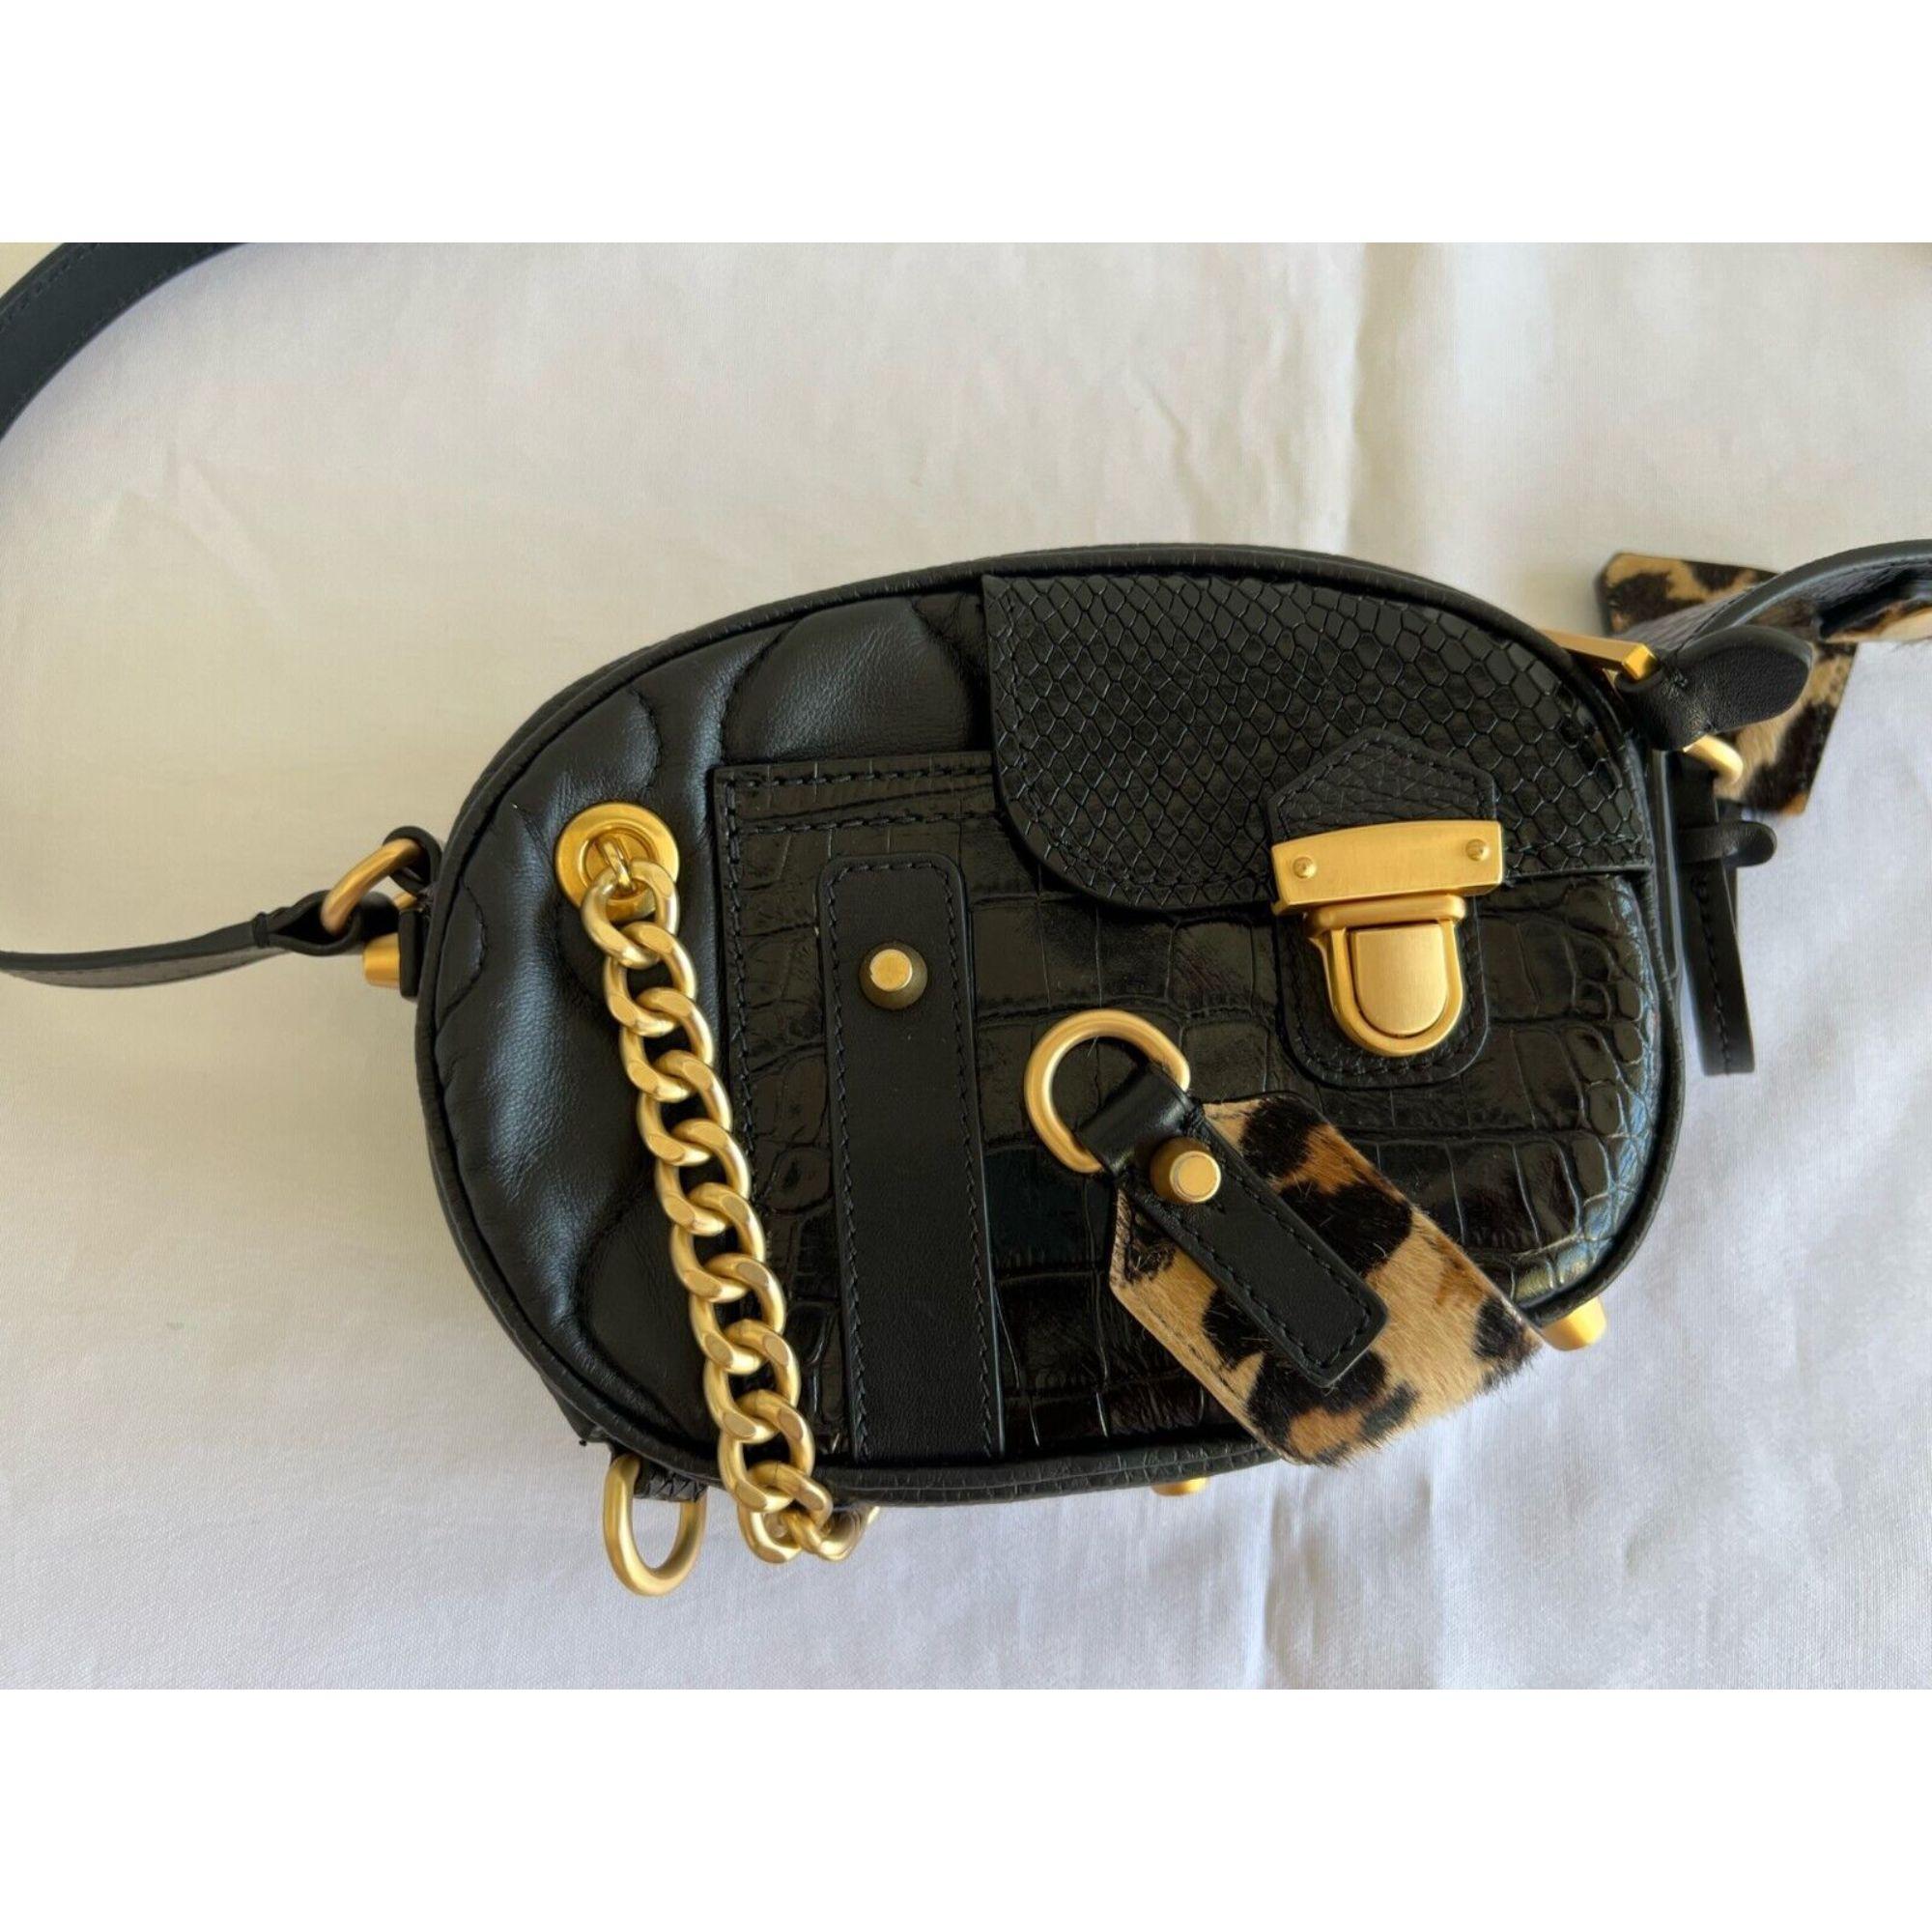 AW21 Moschino Couture Gold Leopard Black Leather Shoulder Bag by Jeremy Scott For Sale 2